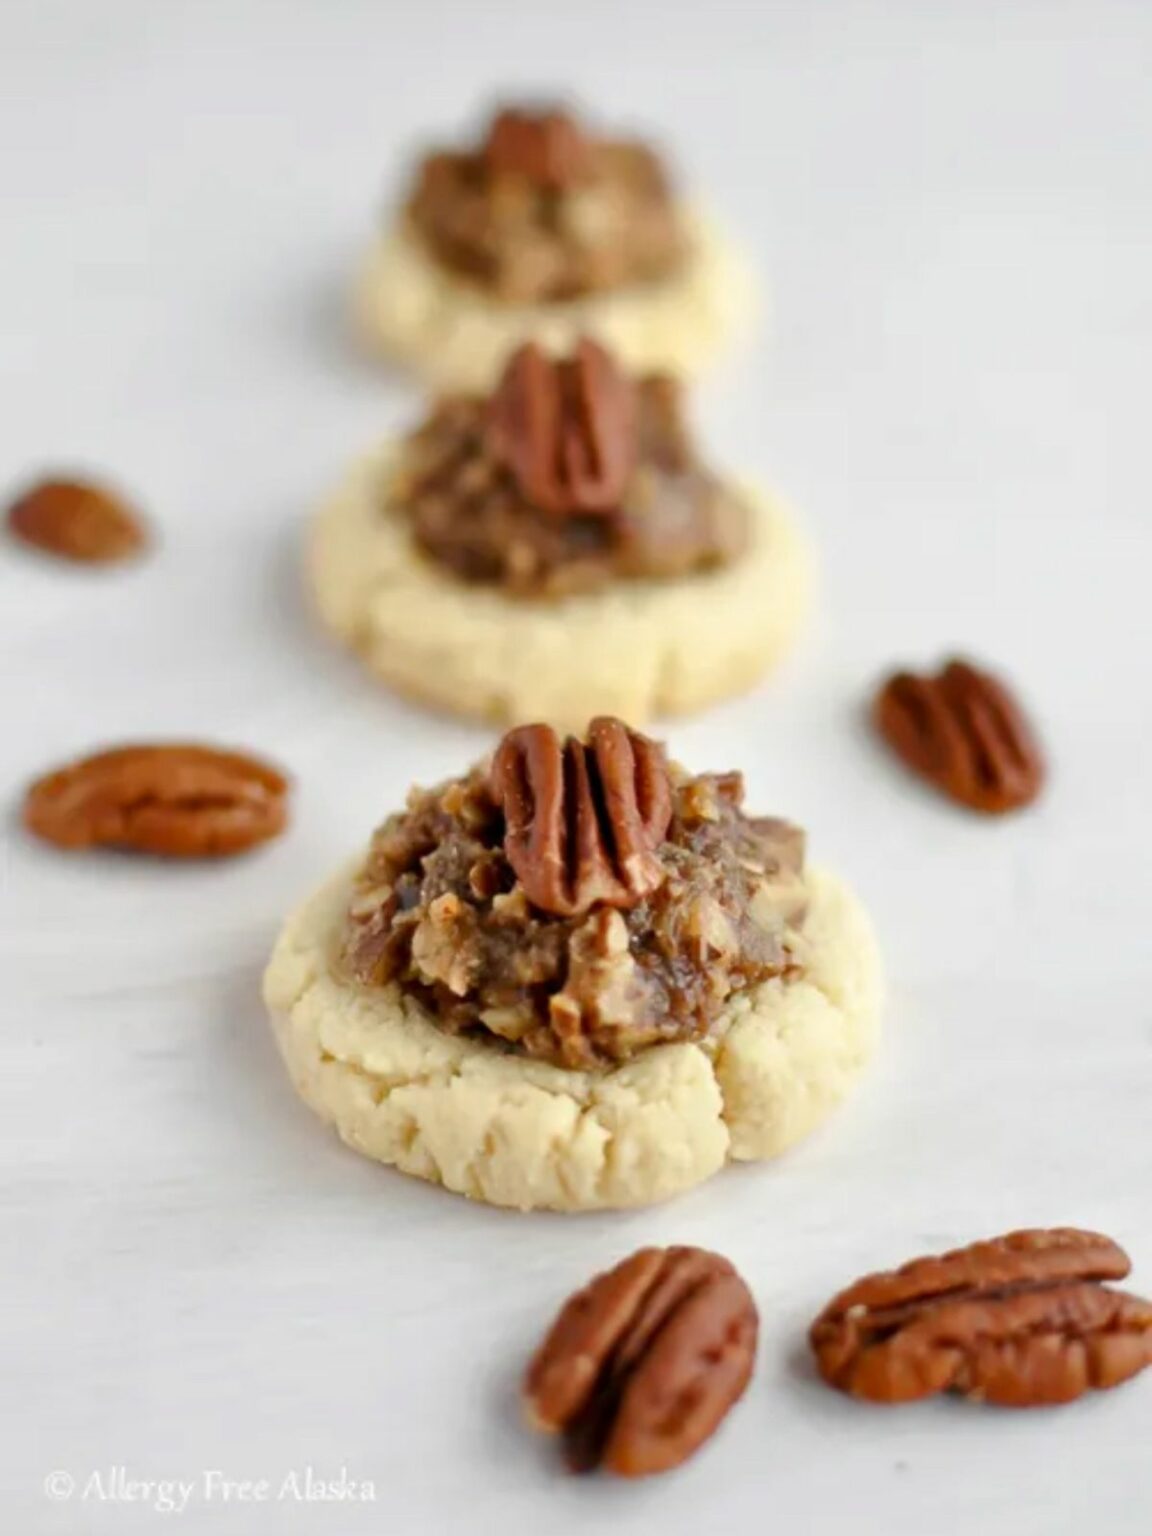 47+ Desserts with Nuts (From Healthy to Indulgent)